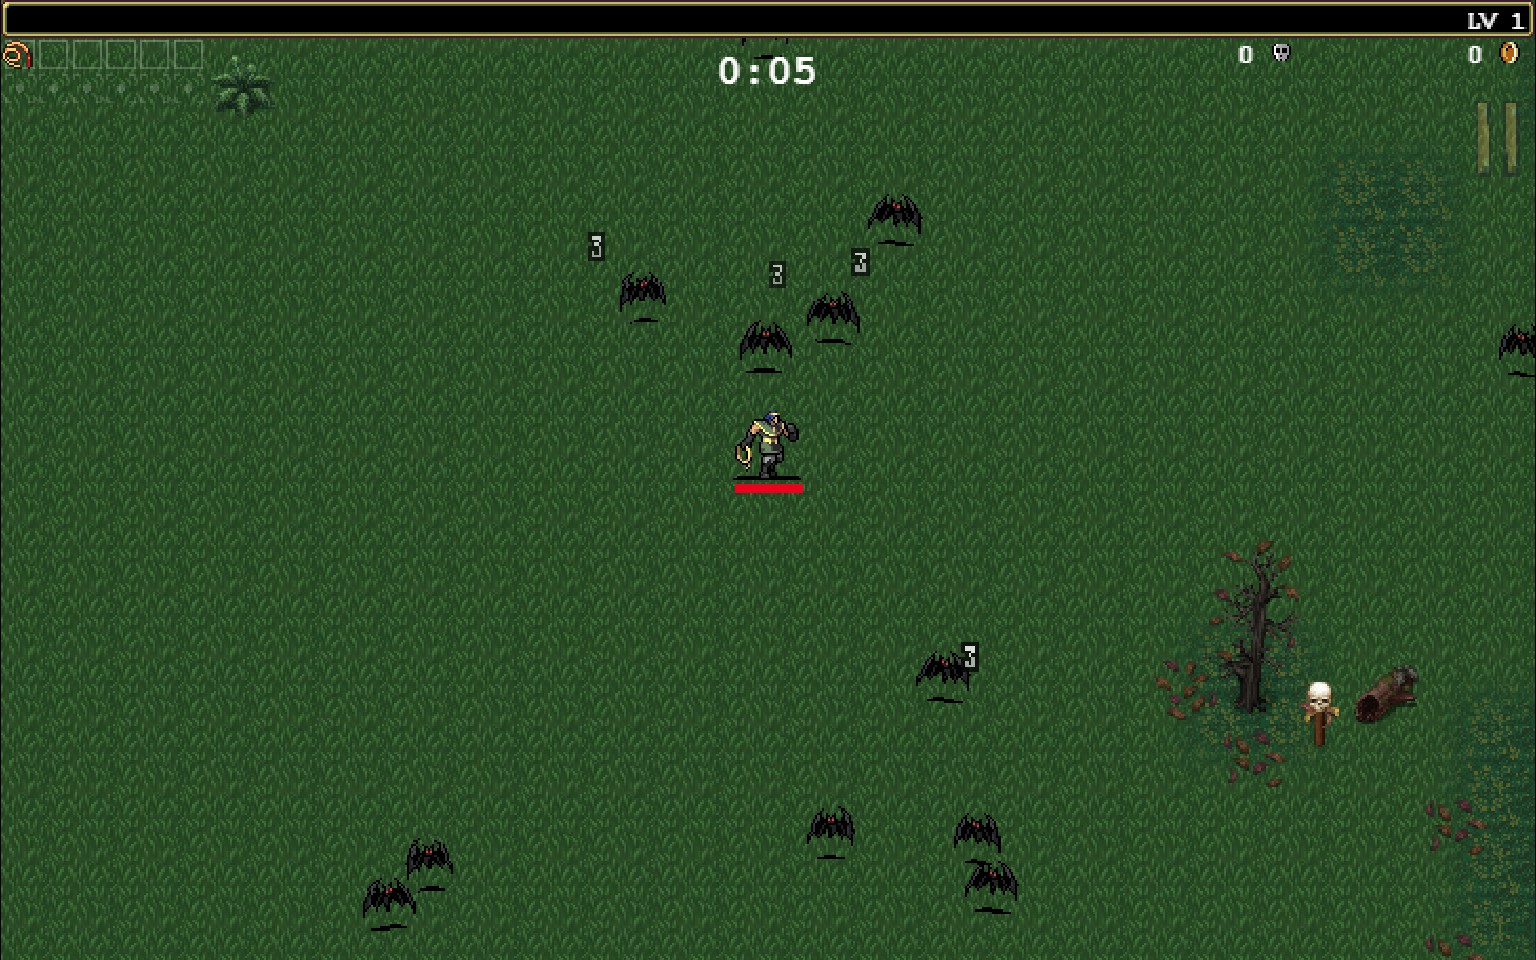 Vampire Survivors—a cheap, minimalistic indie game—is my game of